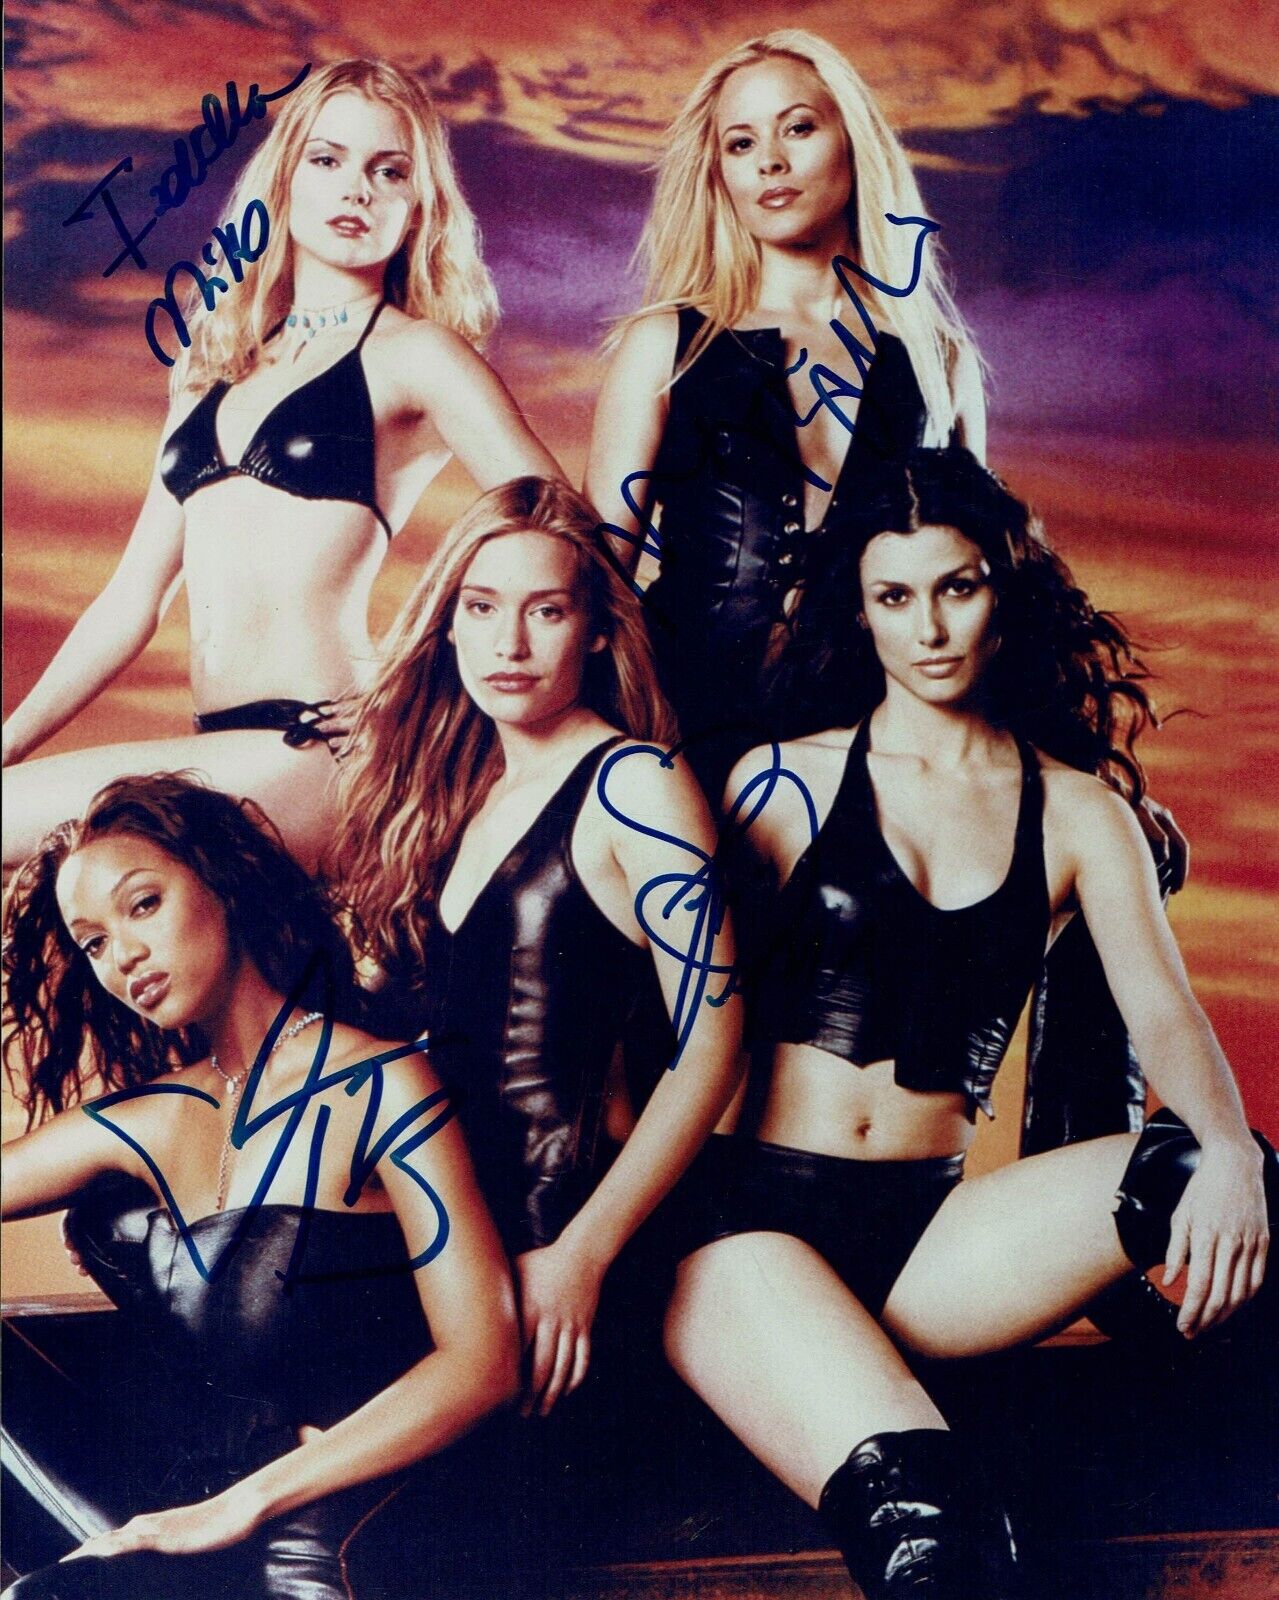 Maria Bello Isabella Miko Tyra Banks Piper Perabo Coyote ugly hand signed photo